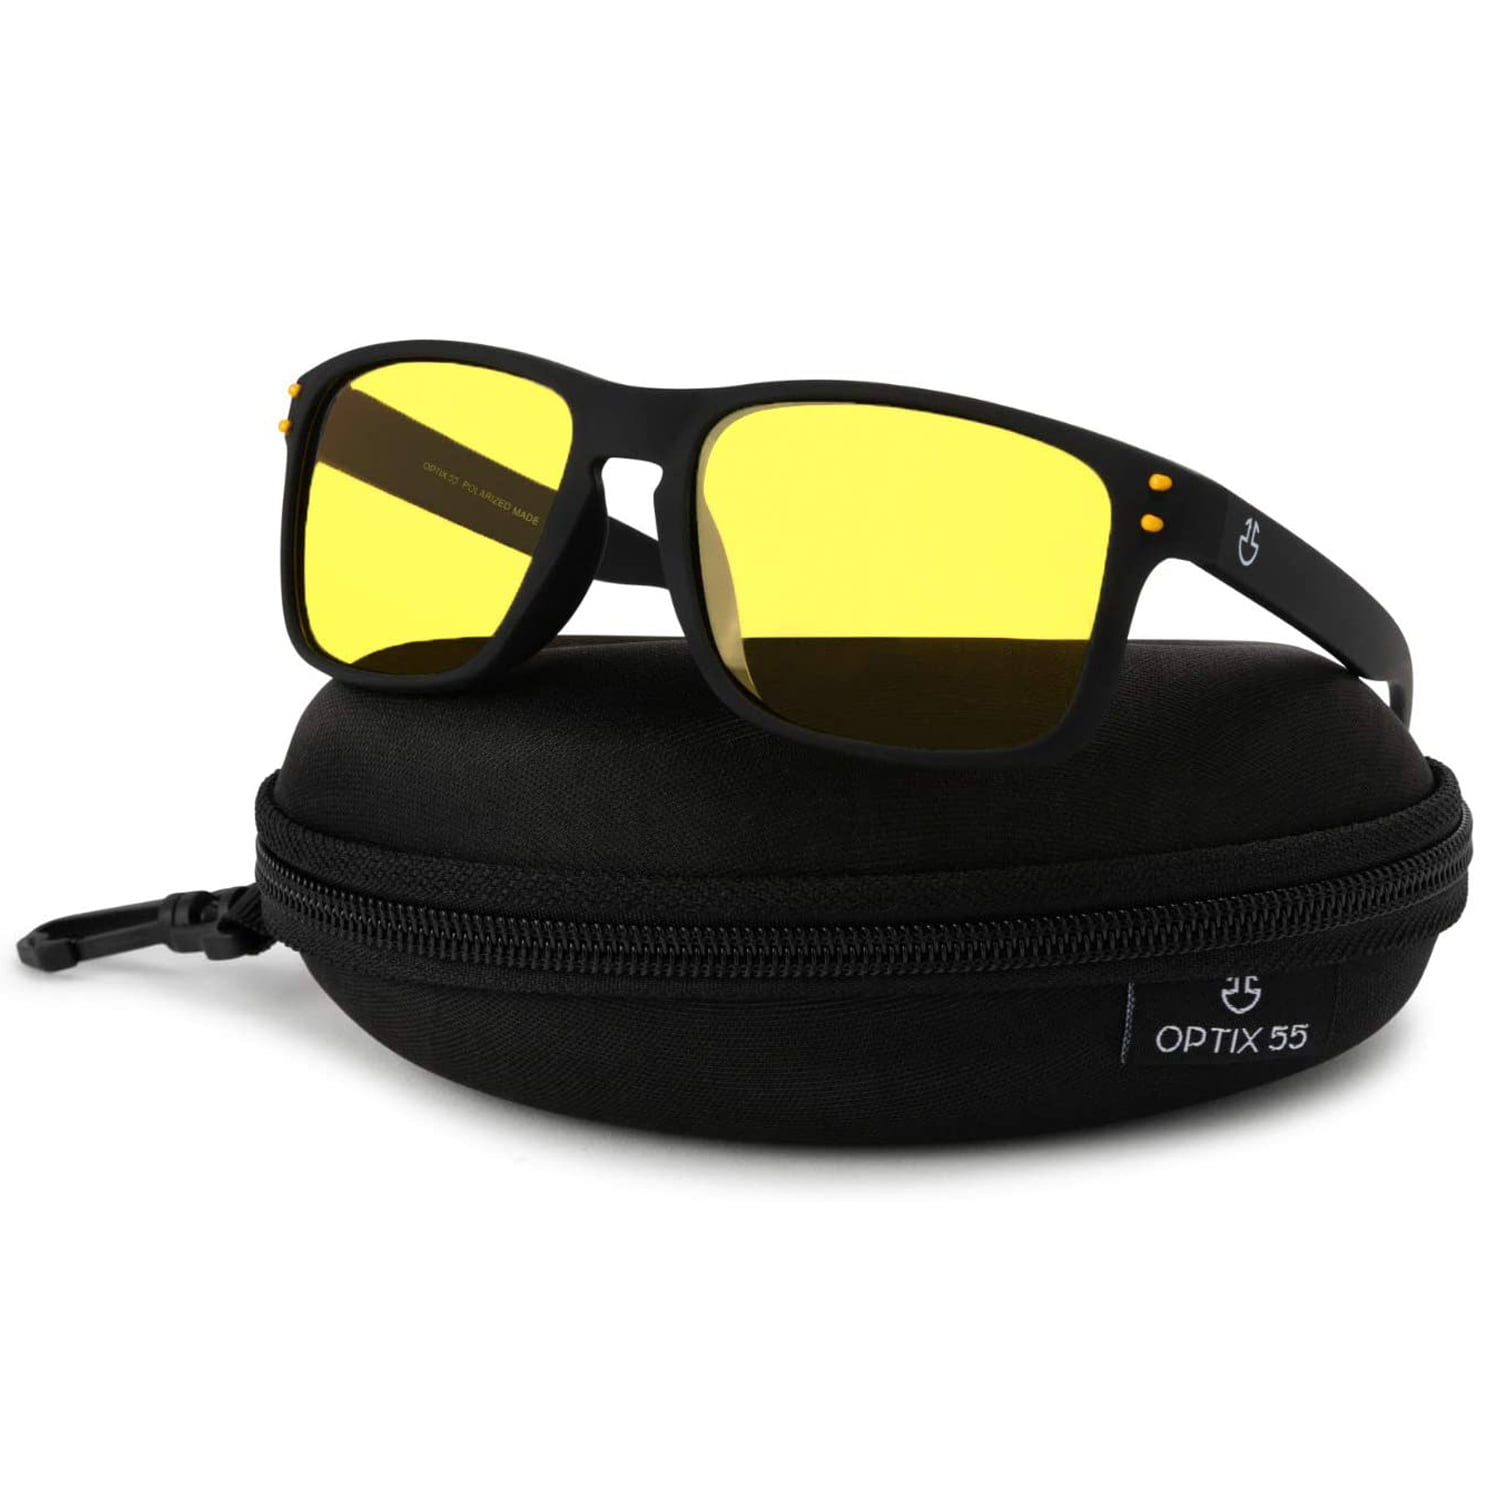 Matrix Polarized Glasses for Professional Night Driving Yellow Mirrored Lenses 